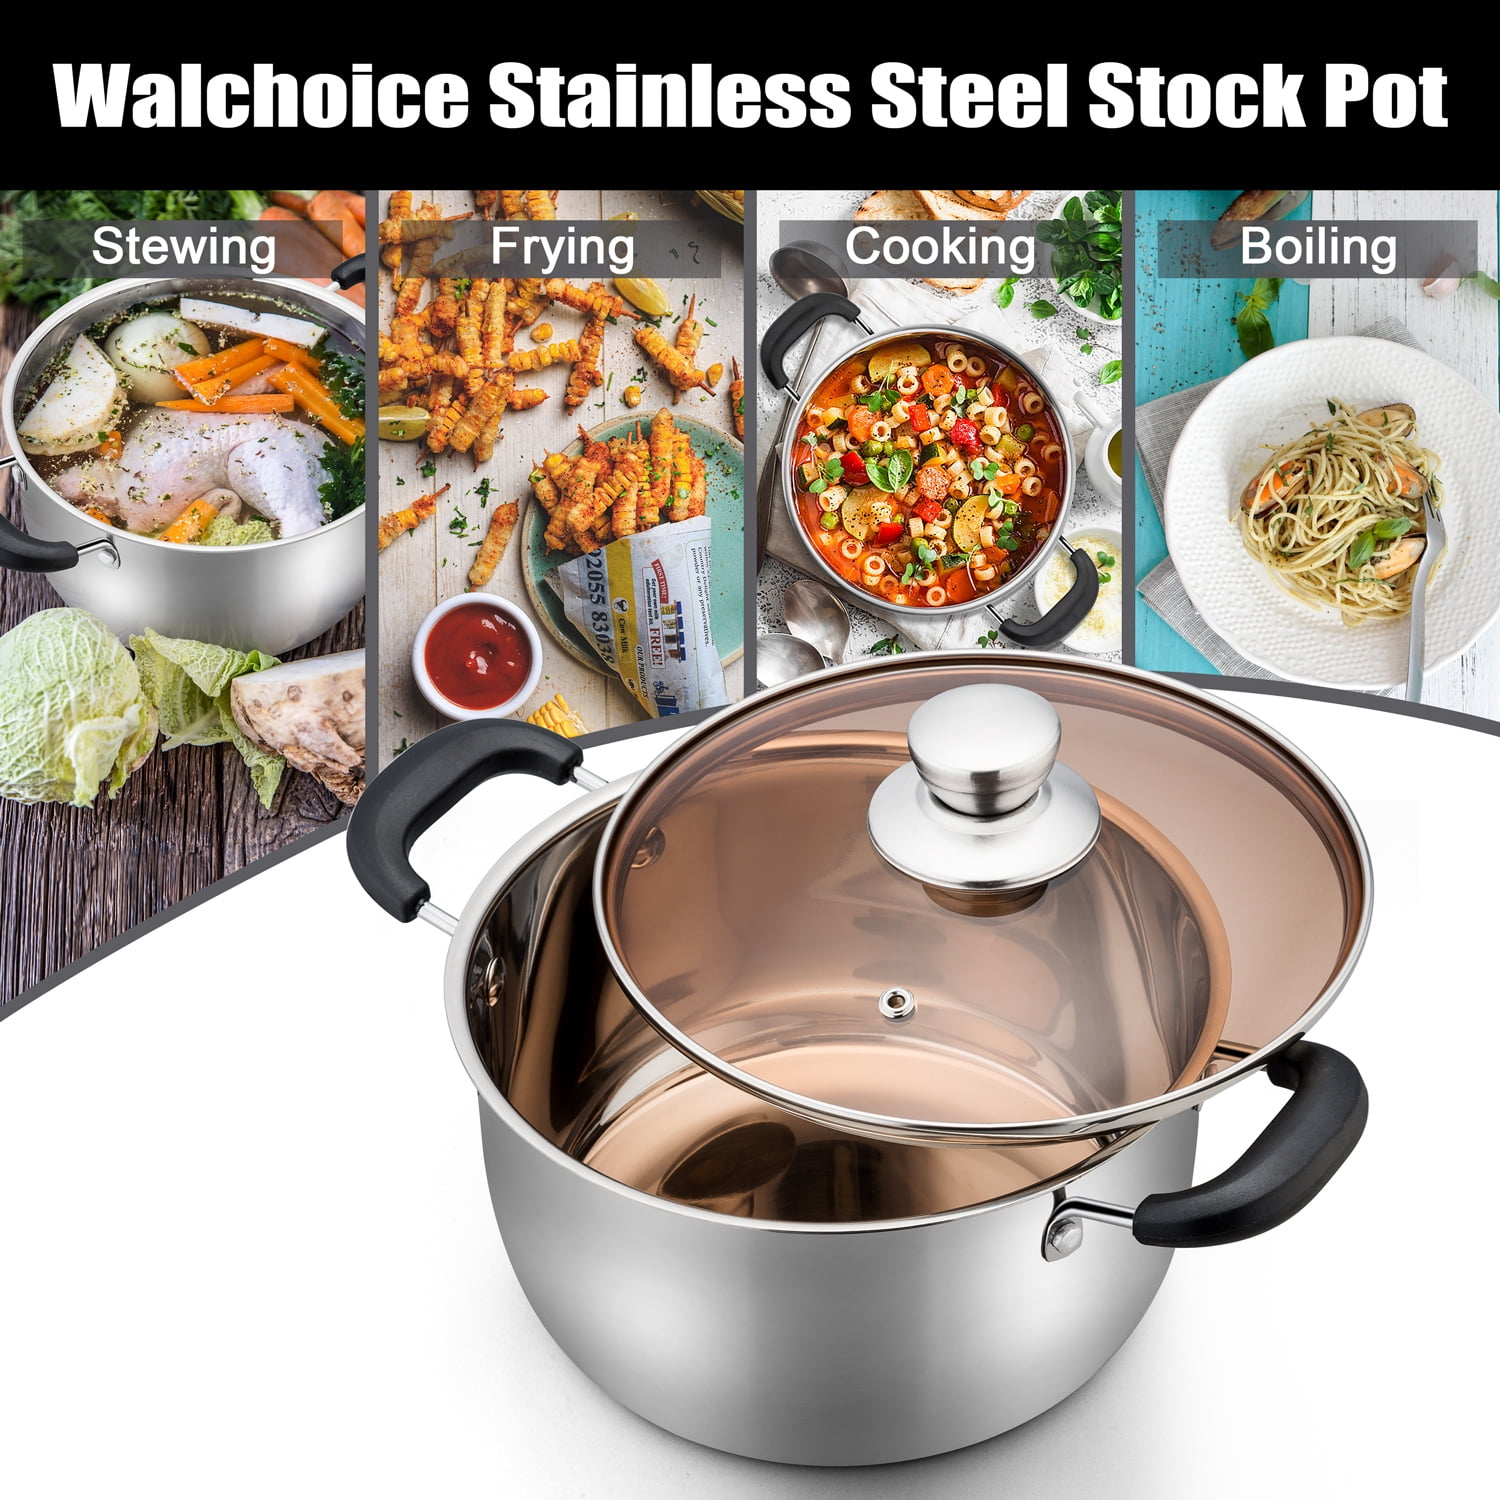 AOSION 6 Quart Stainless Steel Stockpot, All-In-One 6QT Stock Pot, Soup  Pasta Pot with Lid, Cooking Pot, Induction Pot, Sauce Pot Compatible with  All